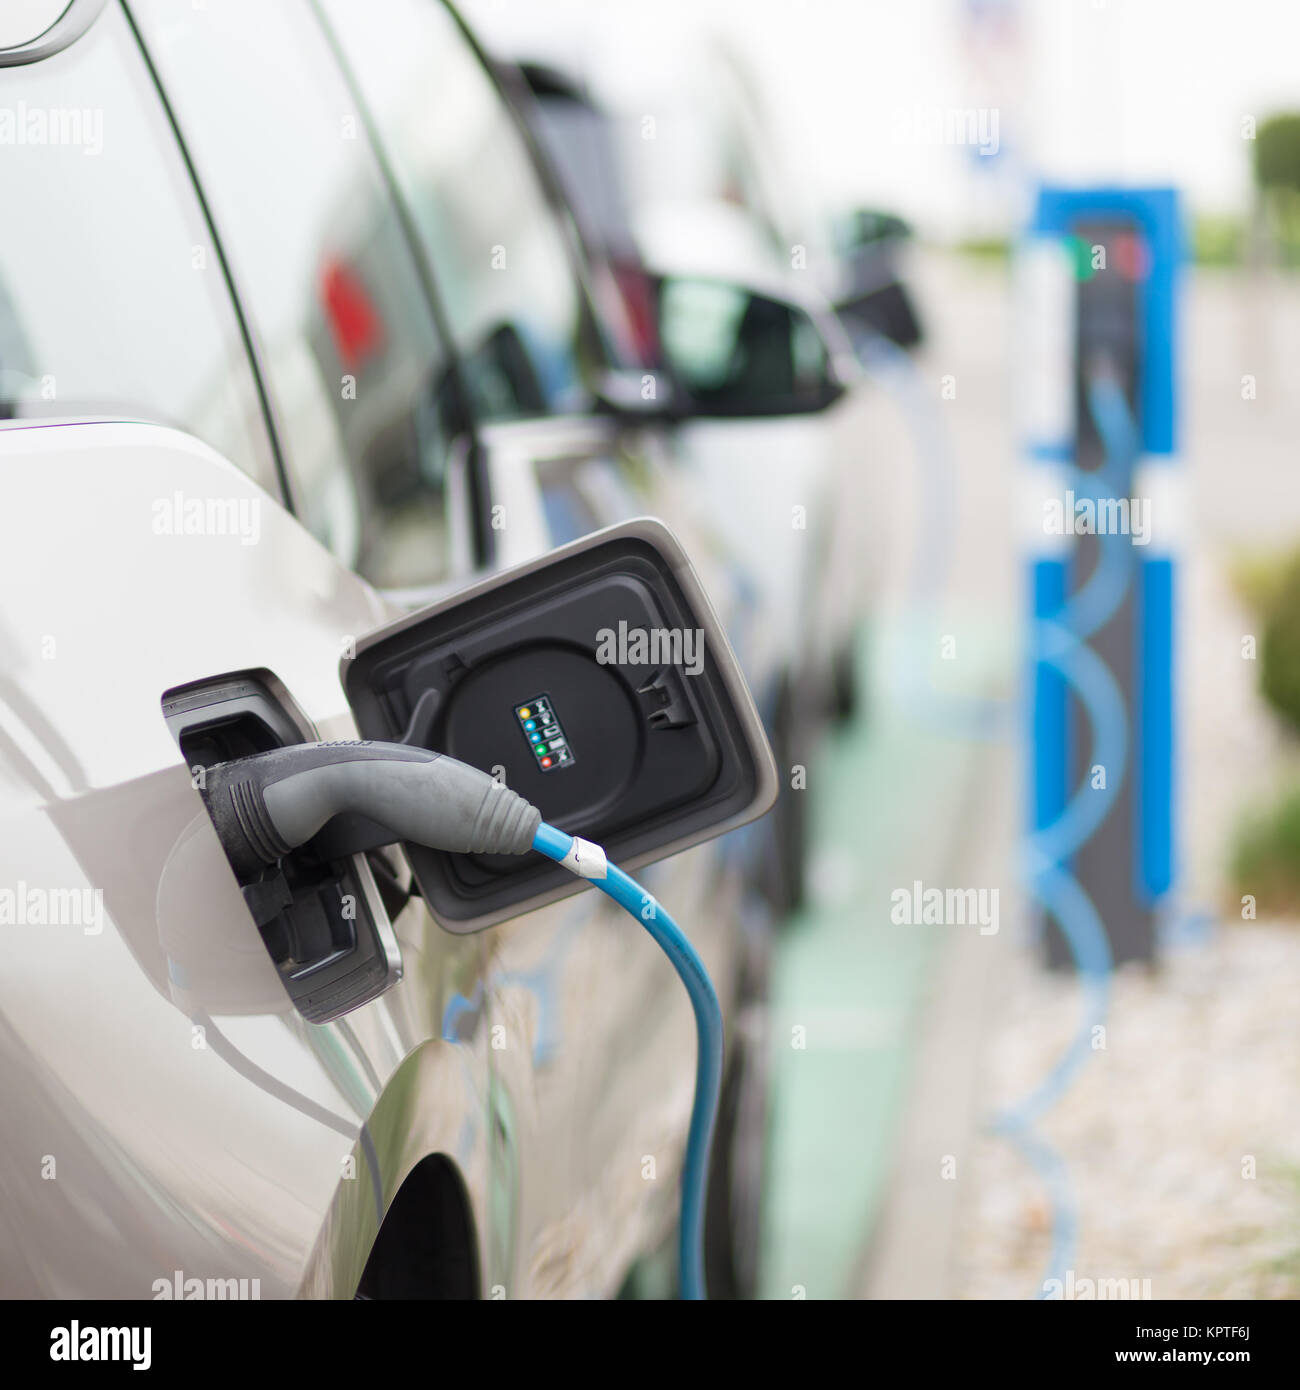 Power supply for electric car charging.  Electric car charging station. Close up of the power supply plugged into an electric car being charged. Stock Photo